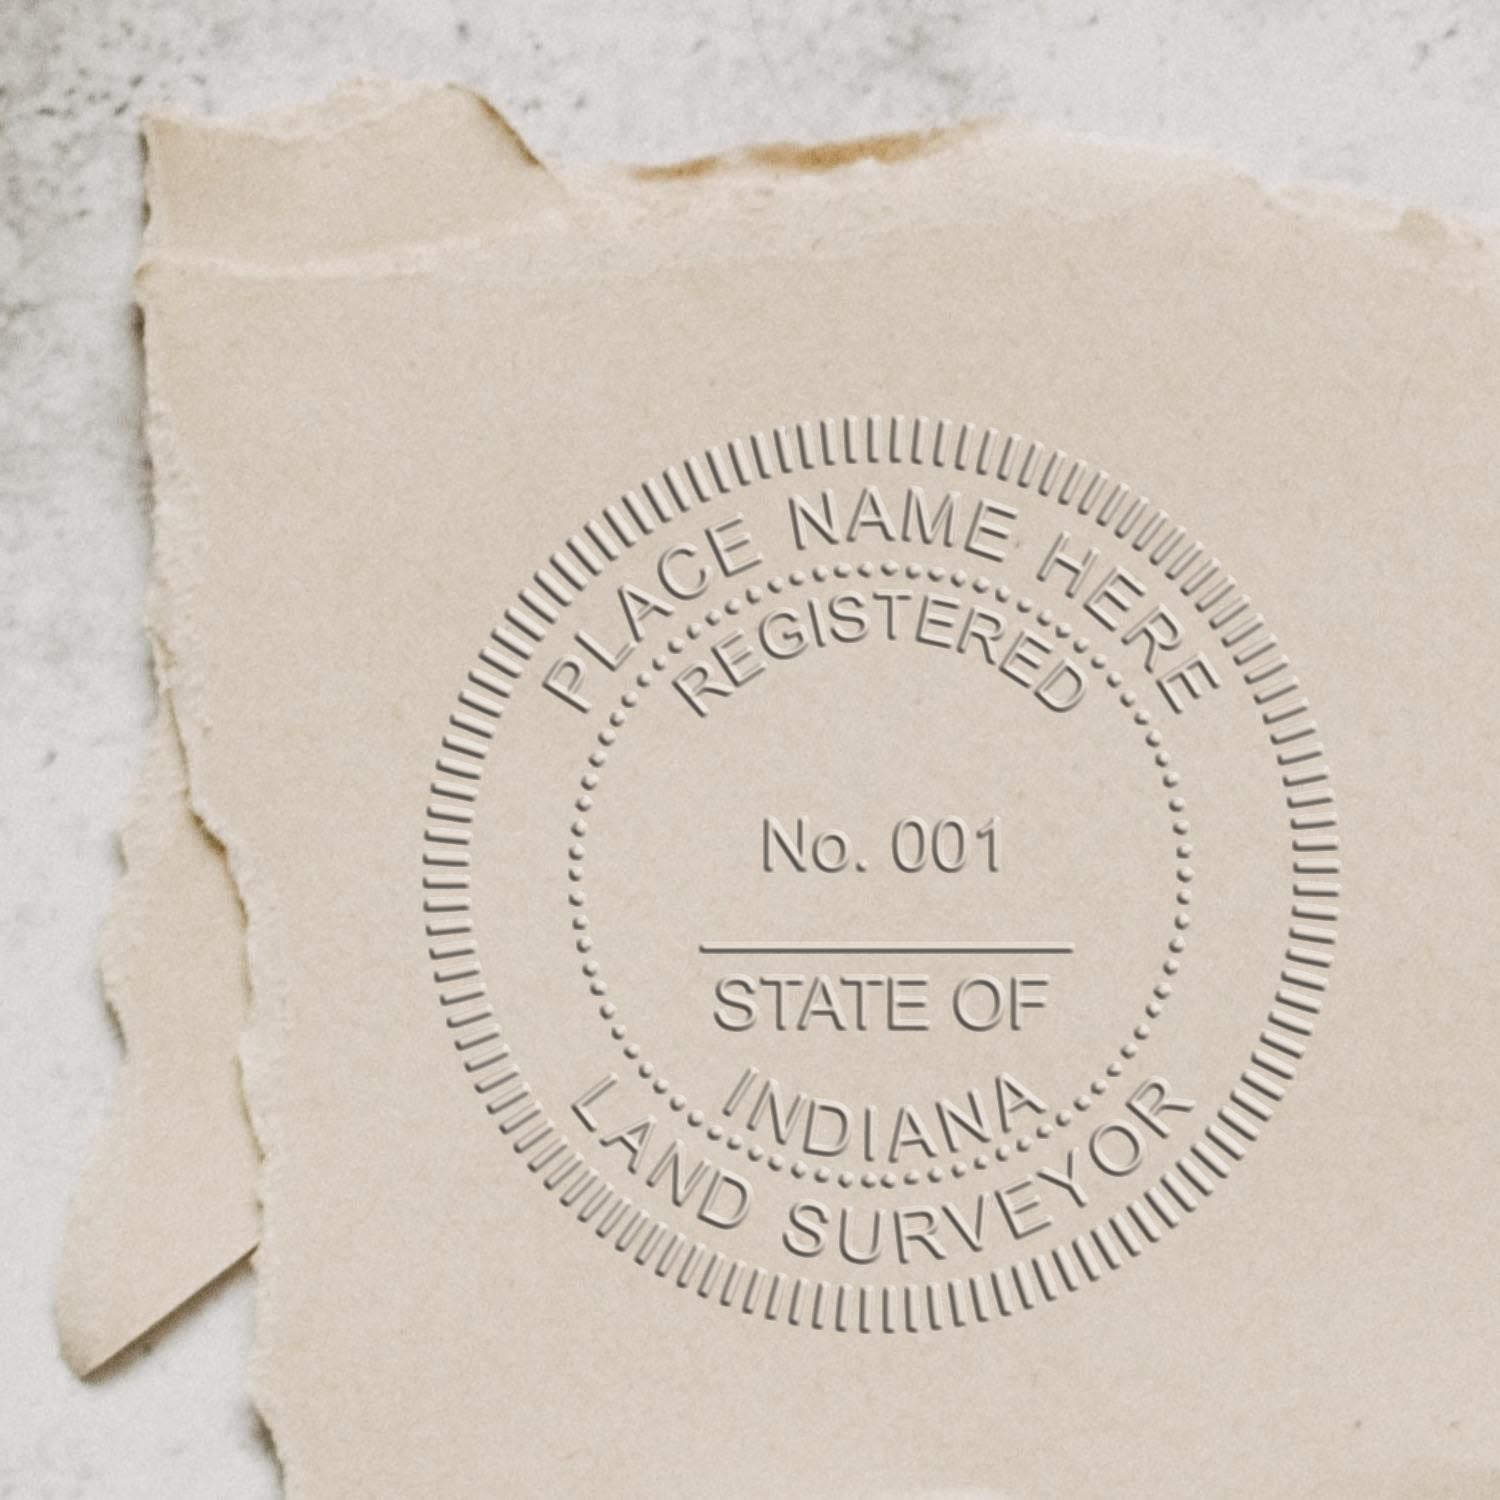 The main image for the Handheld Indiana Land Surveyor Seal depicting a sample of the imprint and electronic files